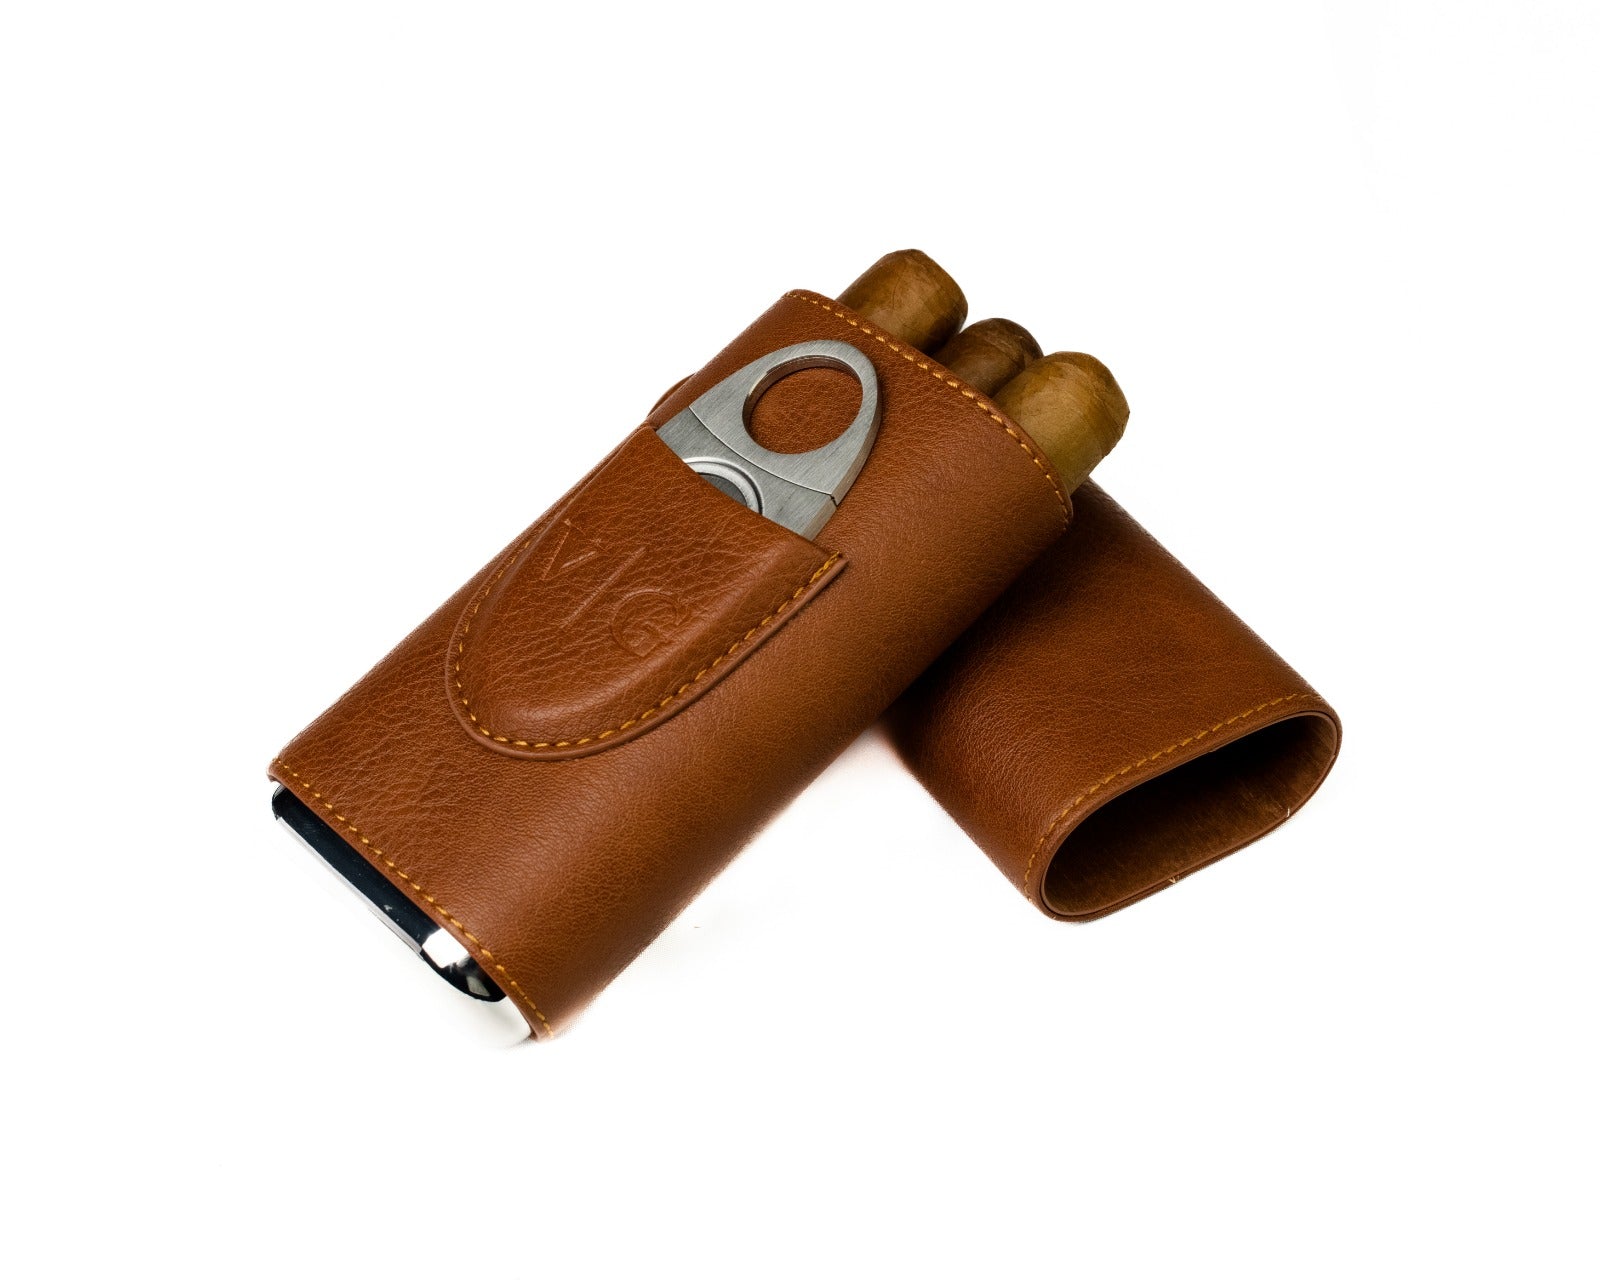 Light Brown Leather Cigar Case - Cutter Included